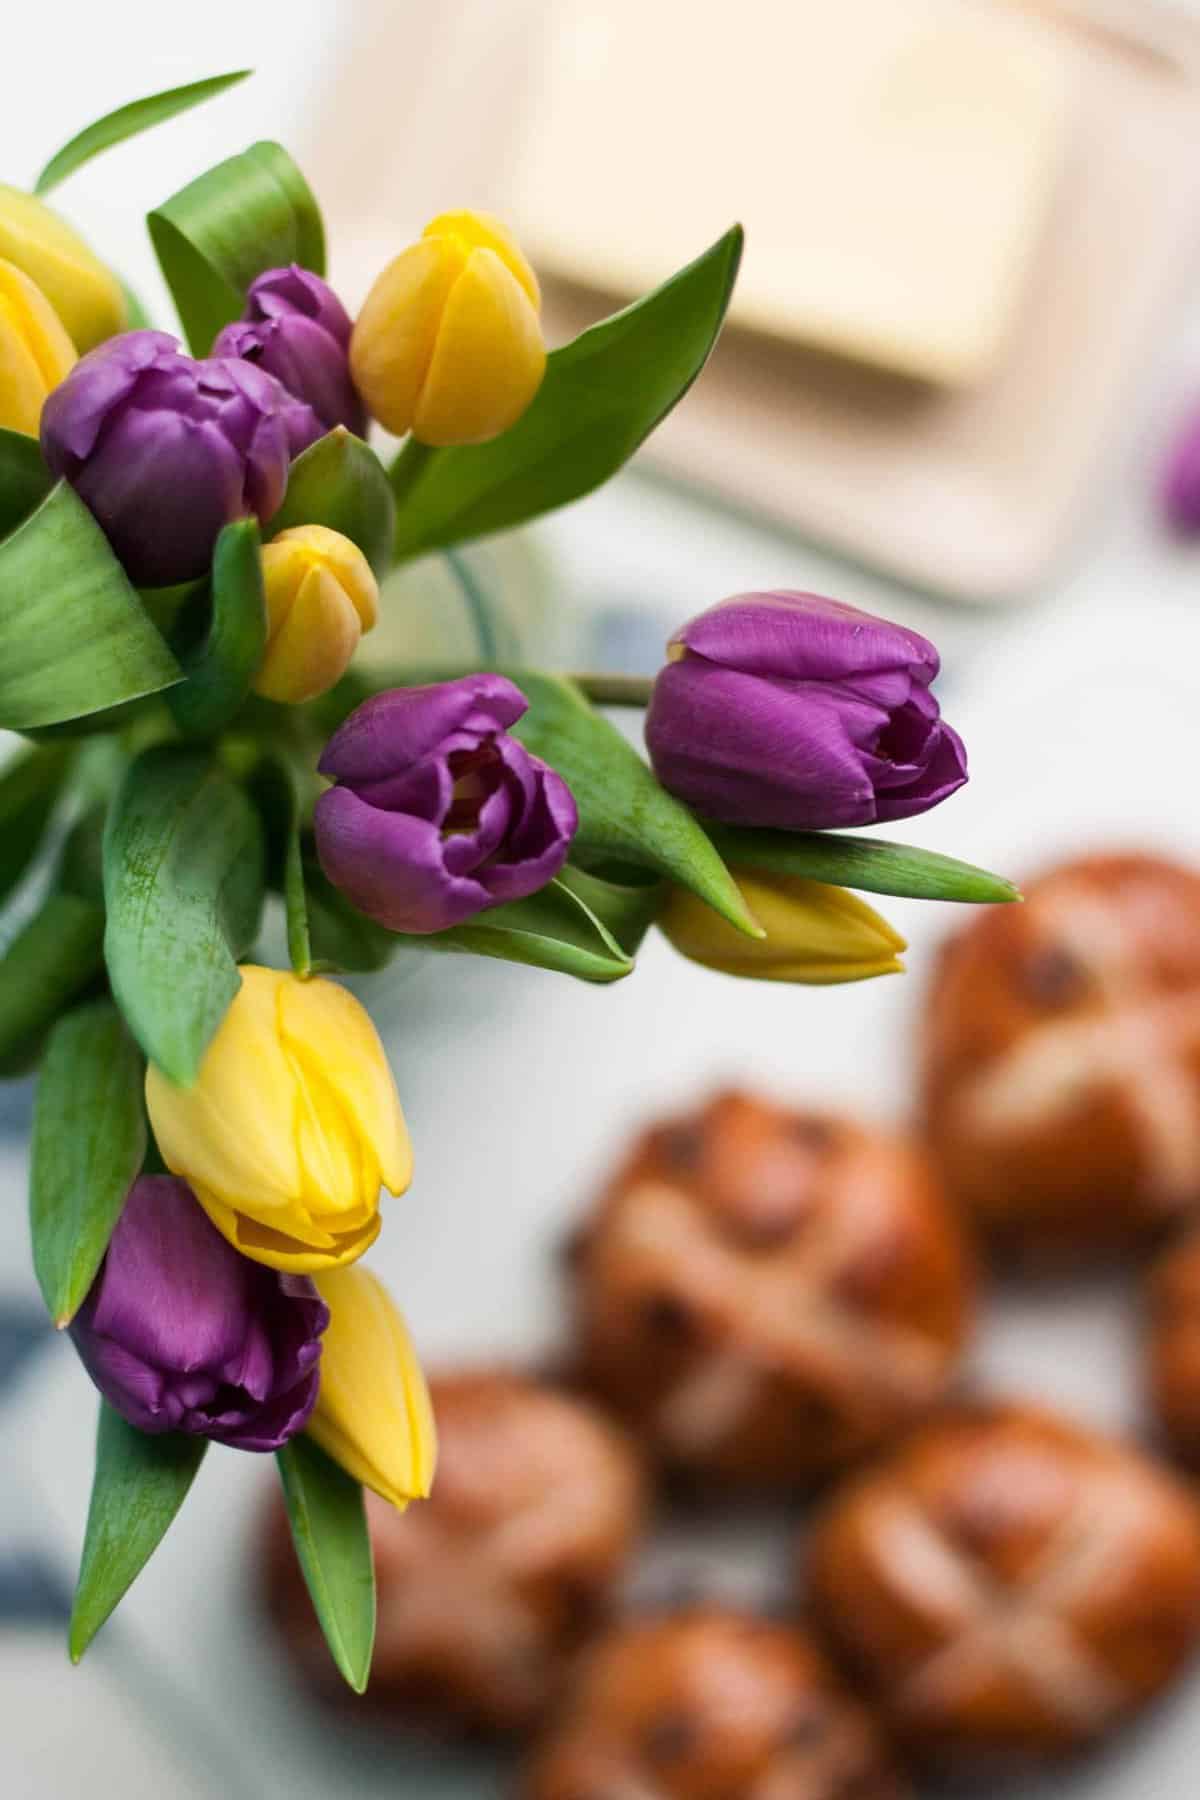 Tulips in a vase with hot cross buns in the background.